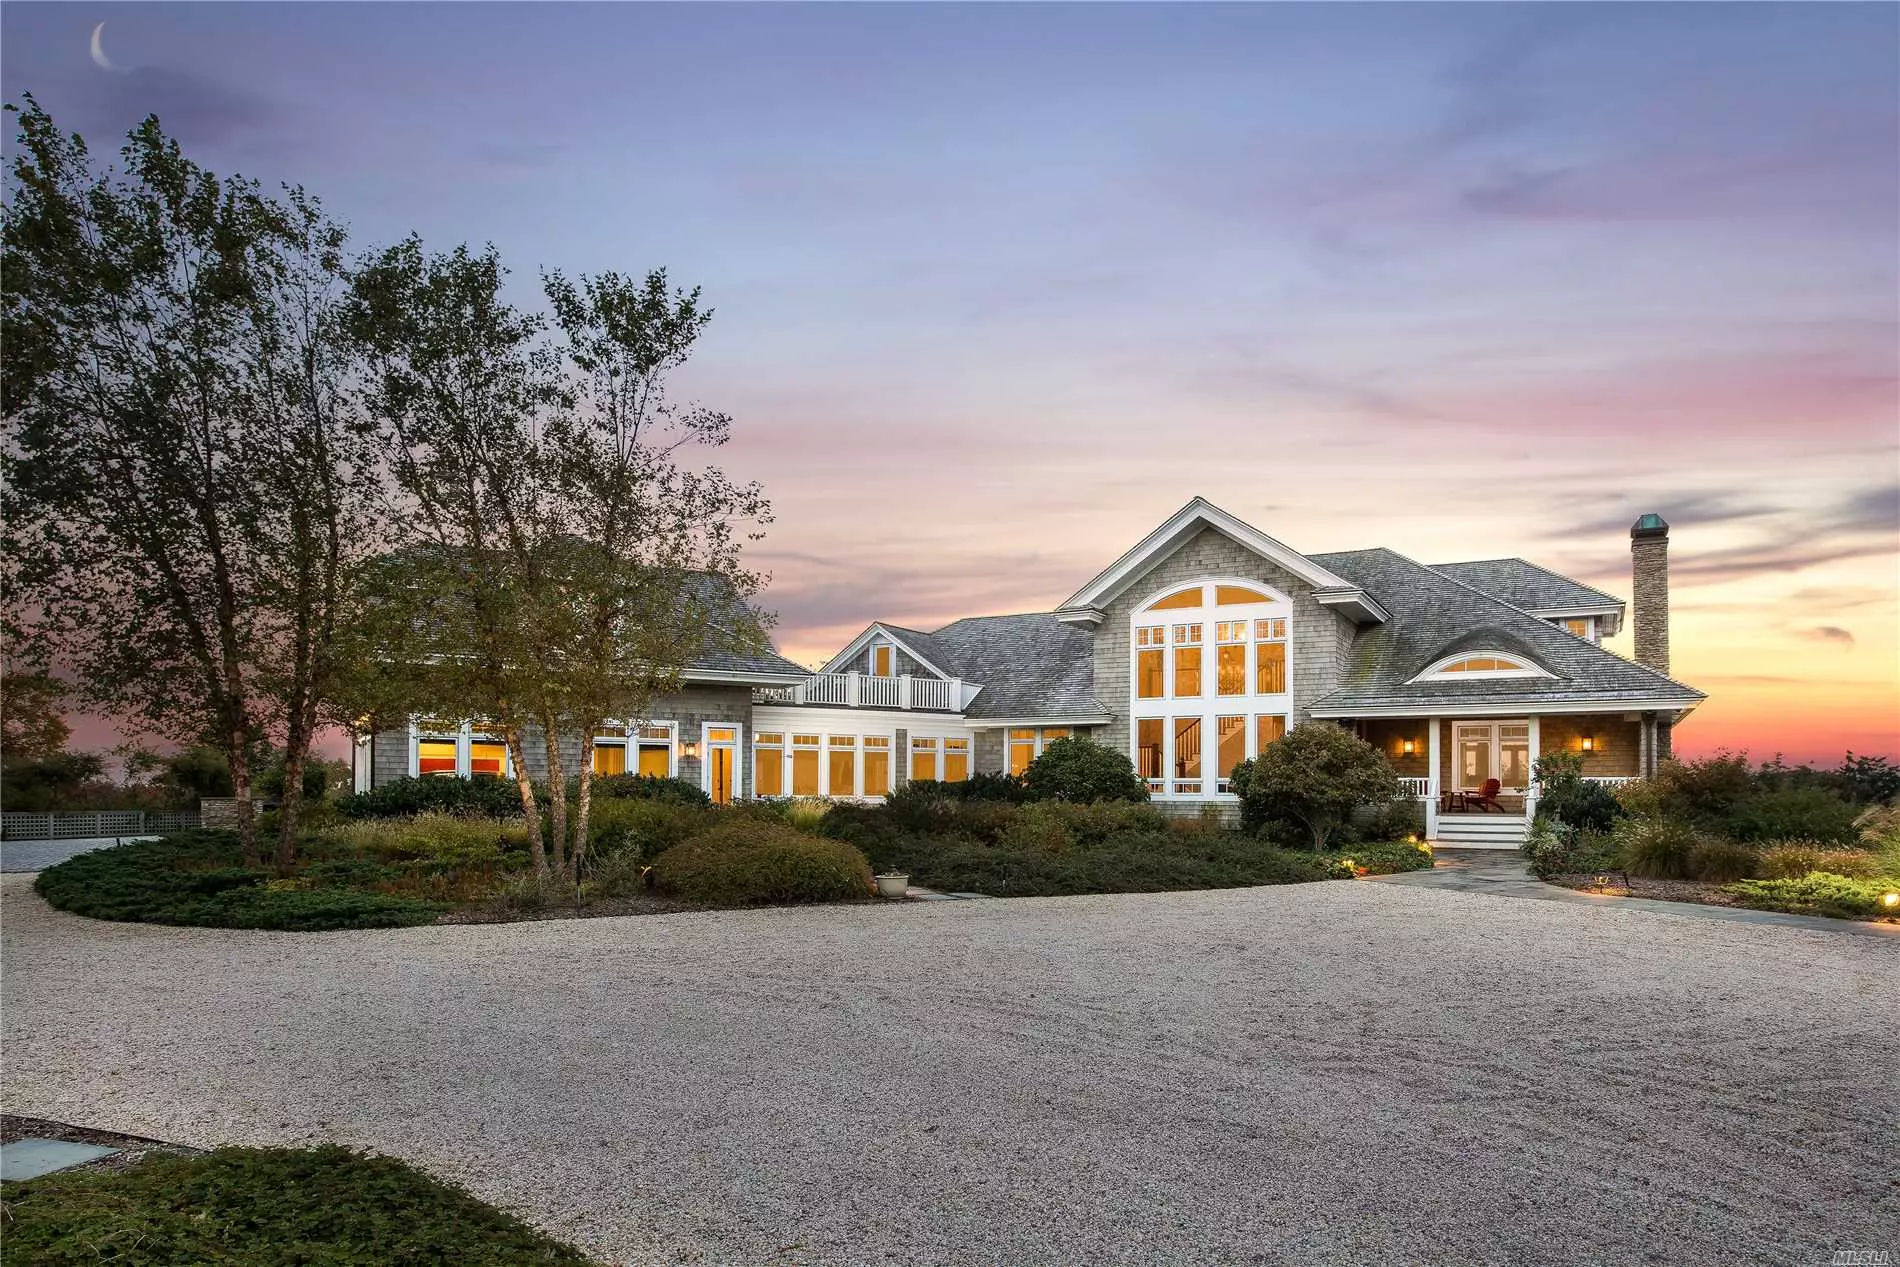 Beautiful Waterfront Estate On 9.25 Acres & Surrounded By Preserved Land. 60 Miles From NYC &1.5 From Bellport Vill. This 7000+ Sq Ft, 4 Bdrm Custom Built Home Is Exquisite. Three car garage with bonus room above. Ensuite Master overlooking Great South Bay. Library, covered porch, Infinity waterfront pool and spa, outside kitchen. Gorgeous pond and landscaping throughout. Too many amenities to list! To schedule a tour and view call or email.